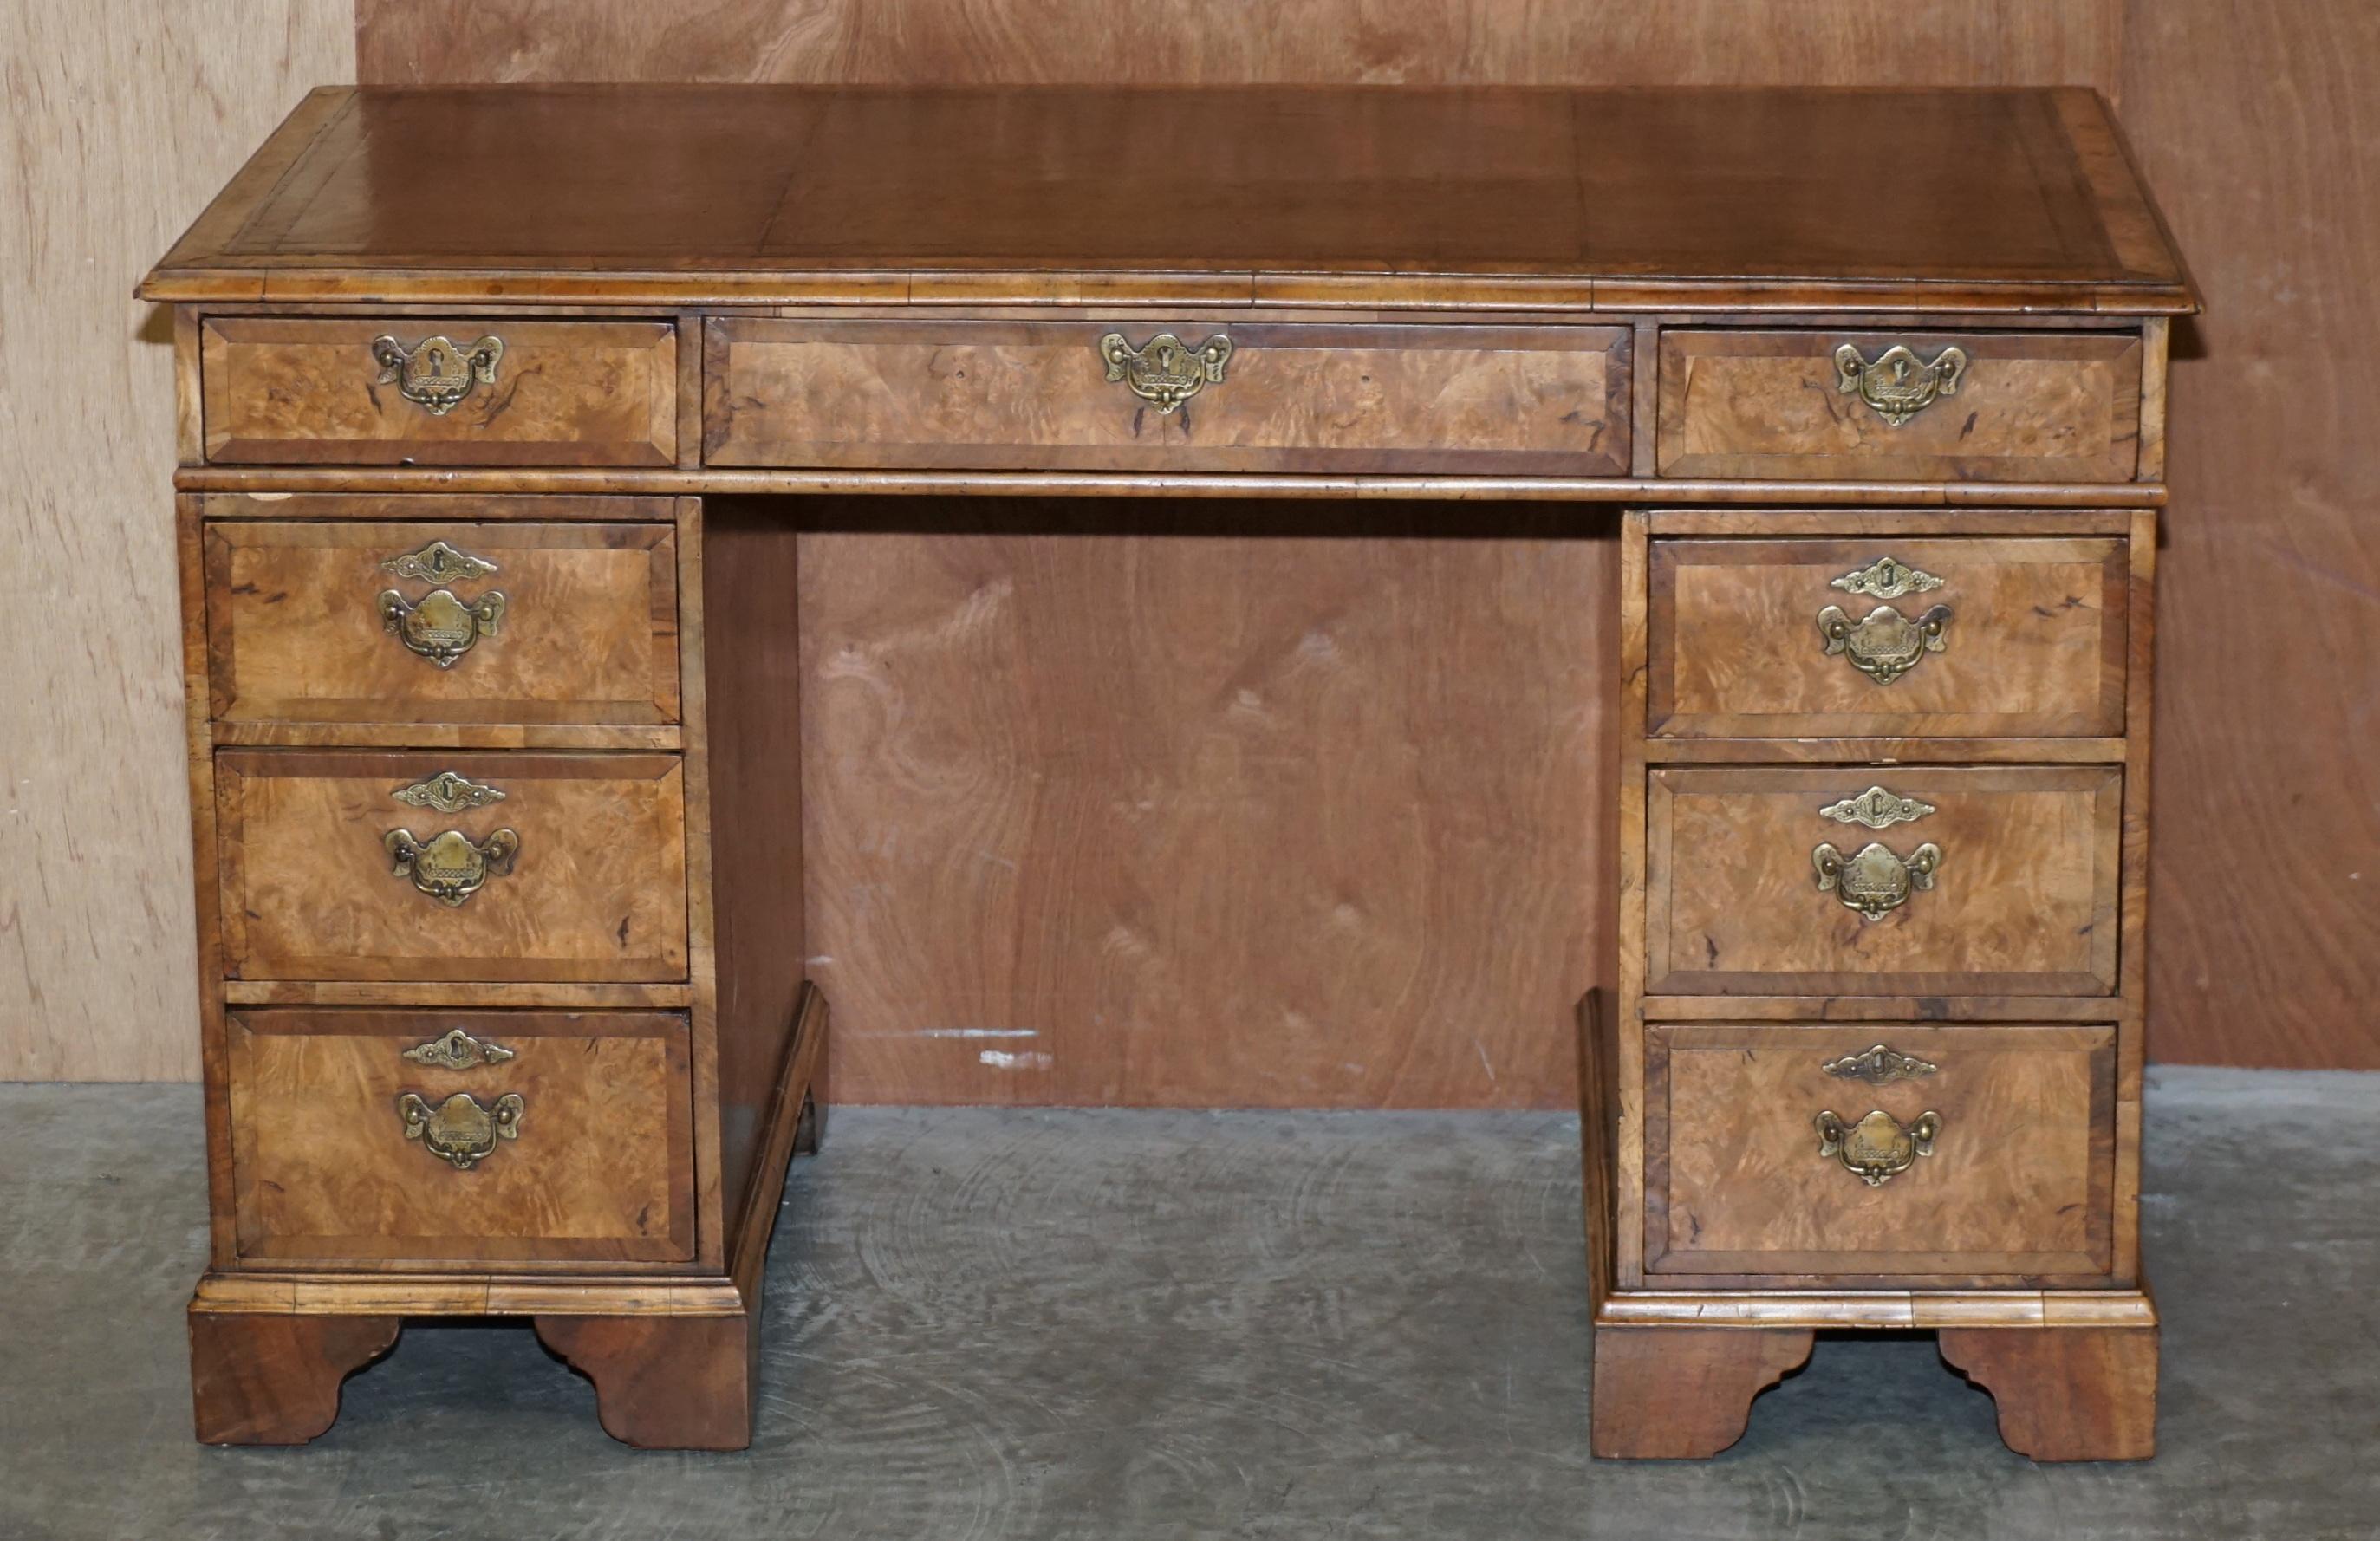 We are delighted to offer for sale this lovely hand made in England Burr Walnut with age brown leather writing surface twin pedestal desk

This is an important and sophisticated piece of English Victorian furniture. Every discerning gentleman’s